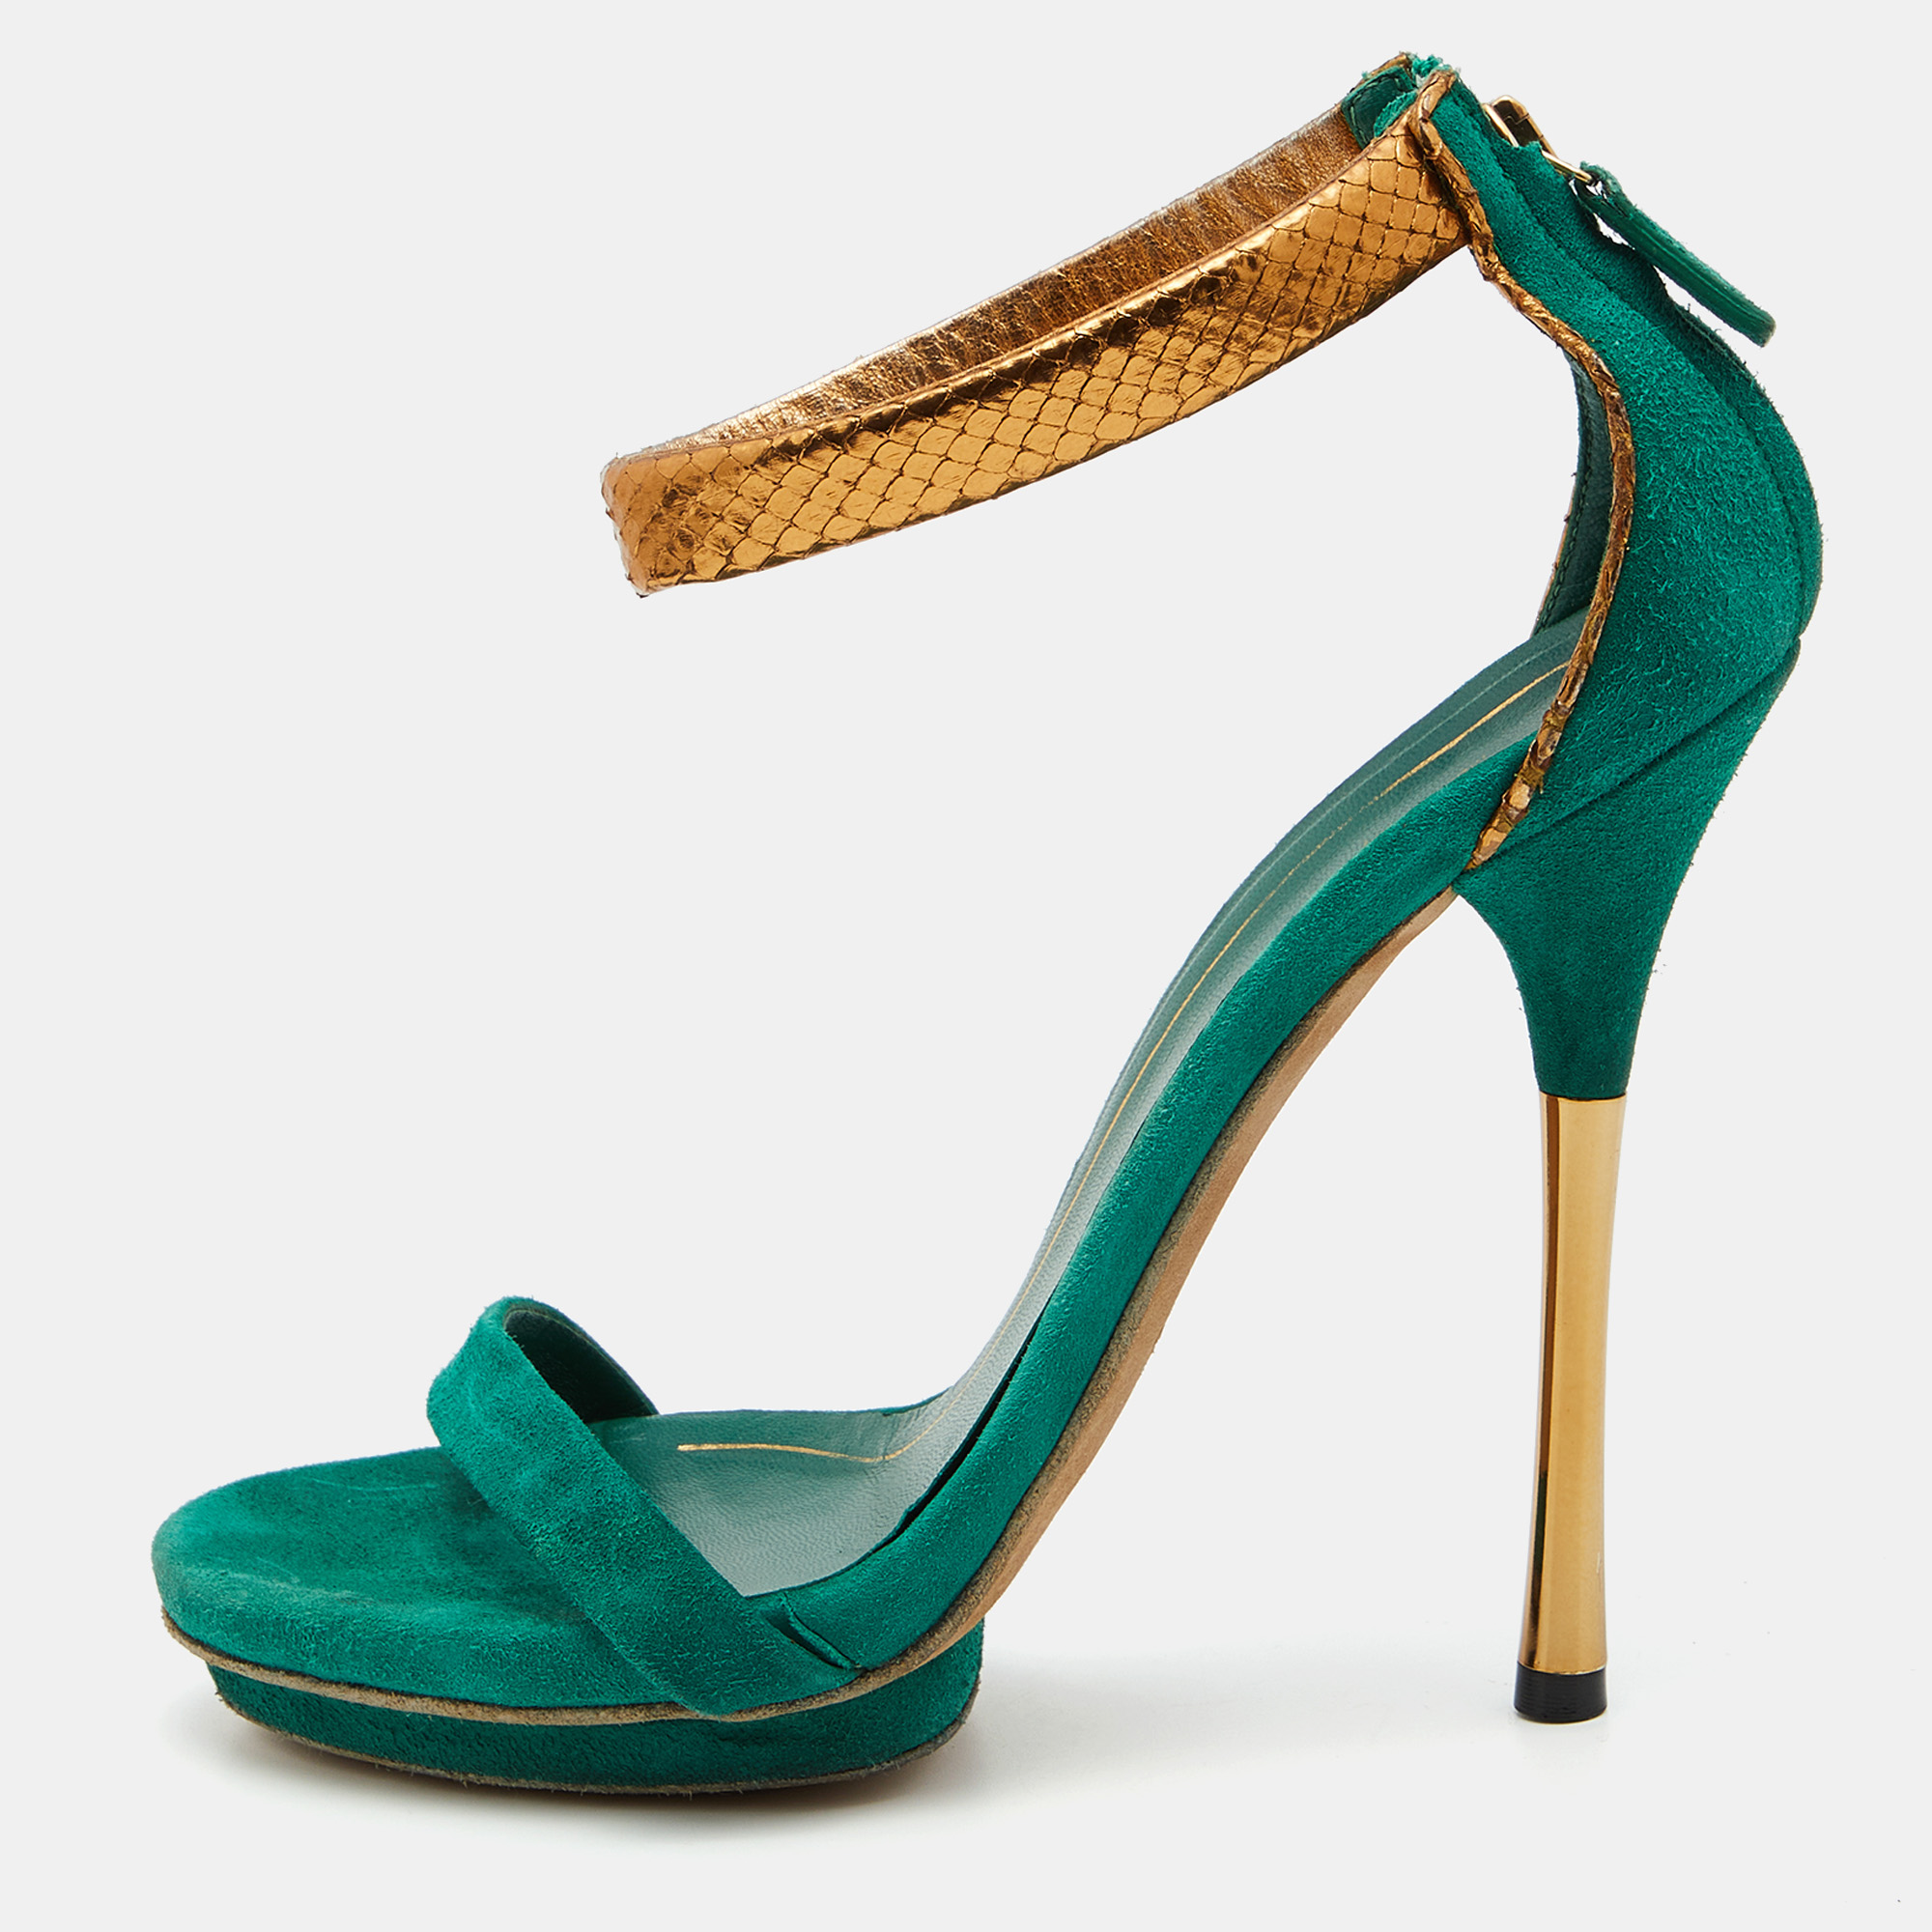 Gucci green/gold suede and snakeskin leather ankle strap sandals size 37.5